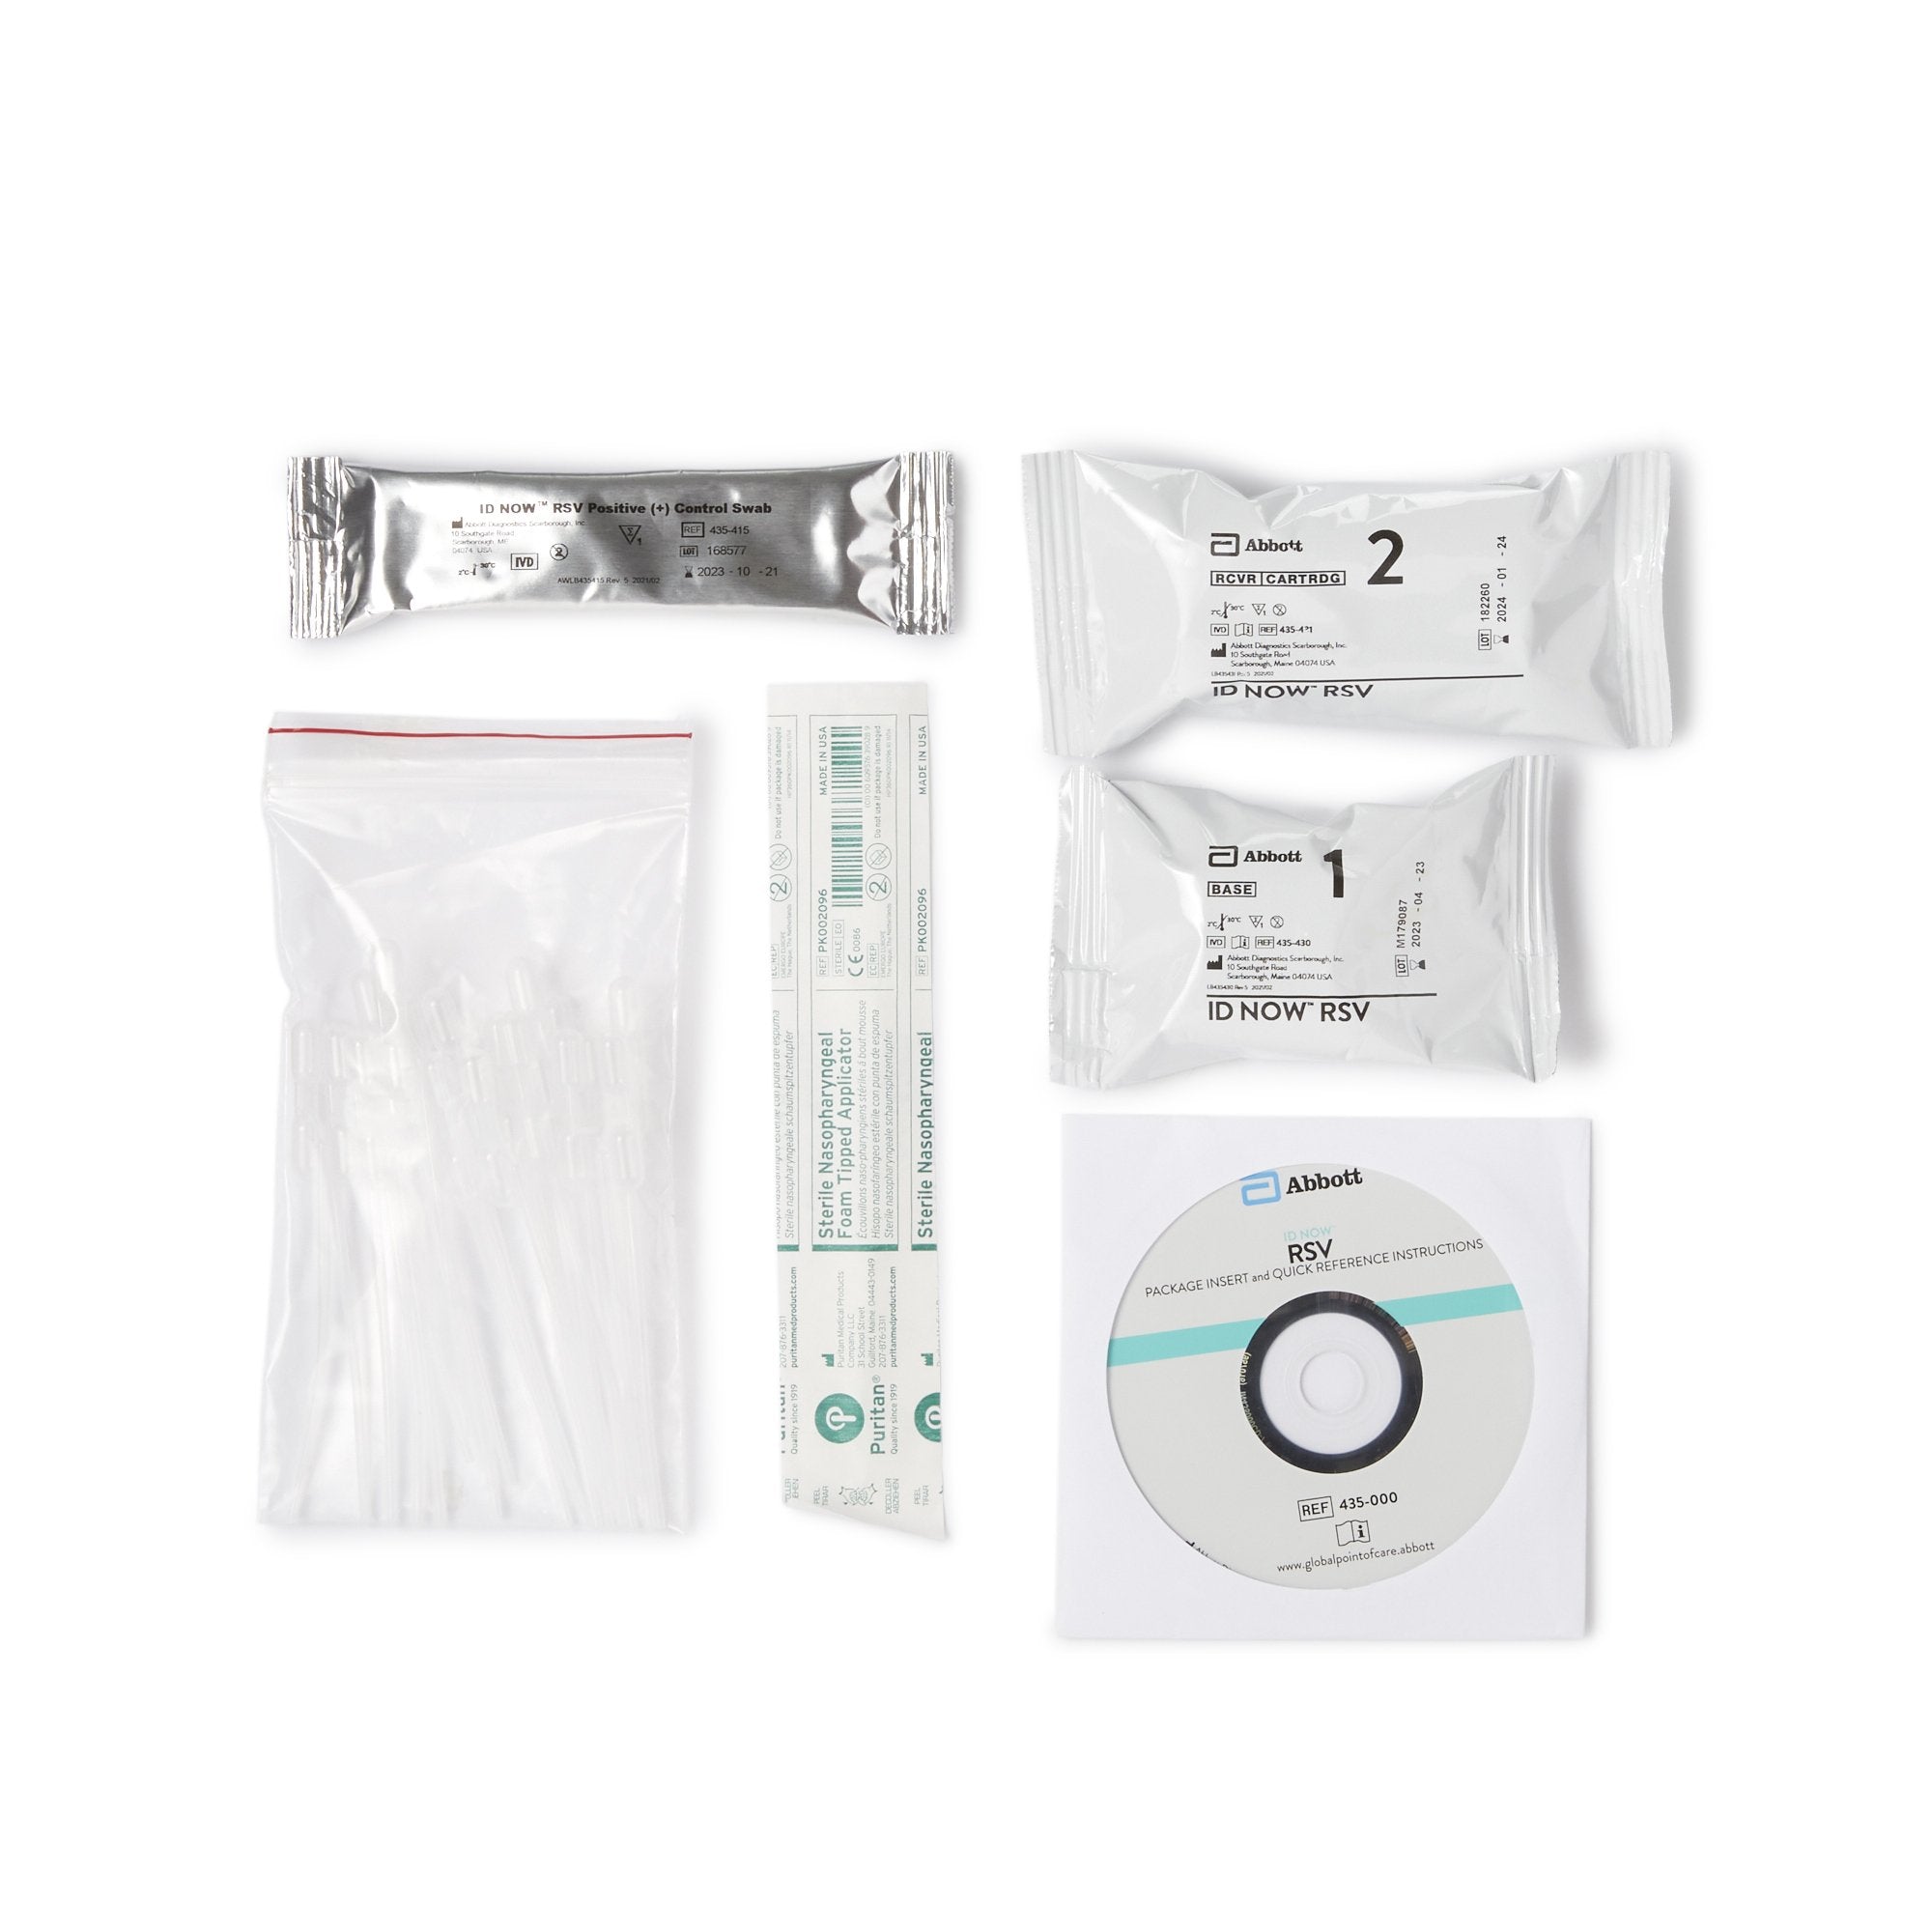 Respiratory Test Kit ID NOW Molecular Diagnostic Respiratory Syncytial Virus Test (RSV) Nasopharyngeal Swab Sample 24 Tests CLIA Waived